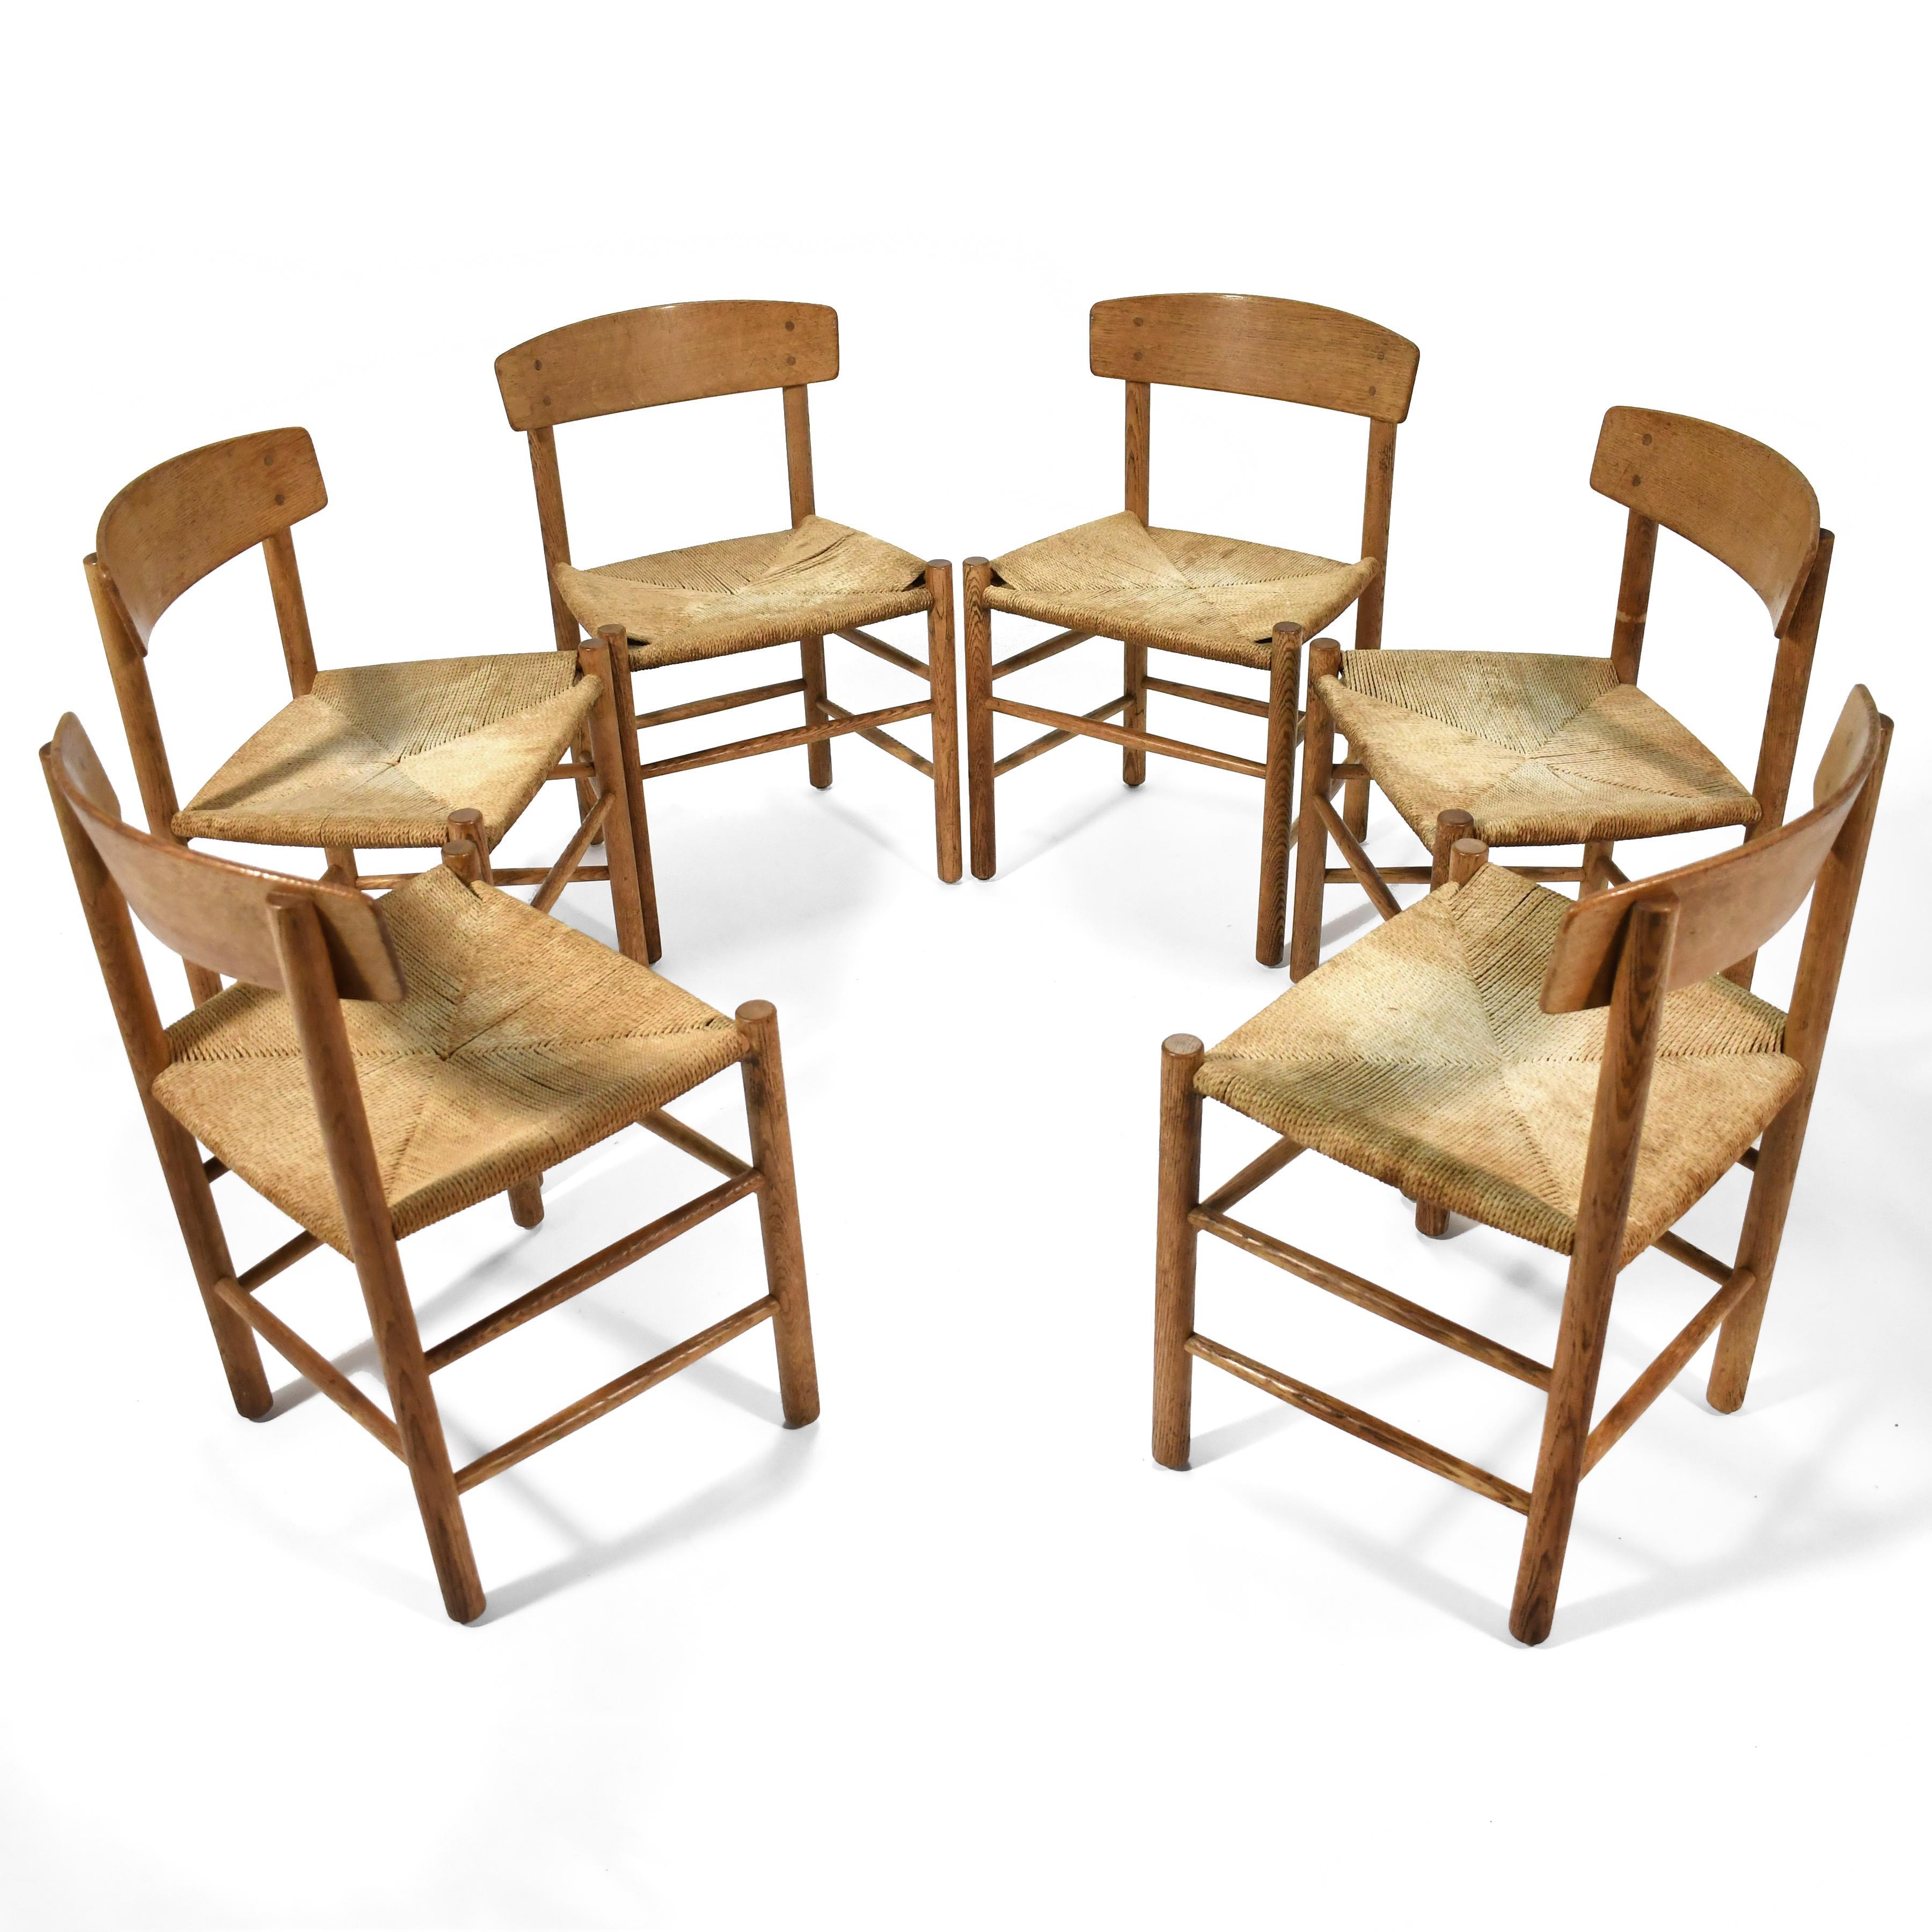 Borge Mogensen's J39 chair design has a shaker style frame of oak with a woven papercord seat. This set of six vintage chairs have a beautiful, rich patina from years of age and use. The frames are all solid, and the seats stable (one chair has a